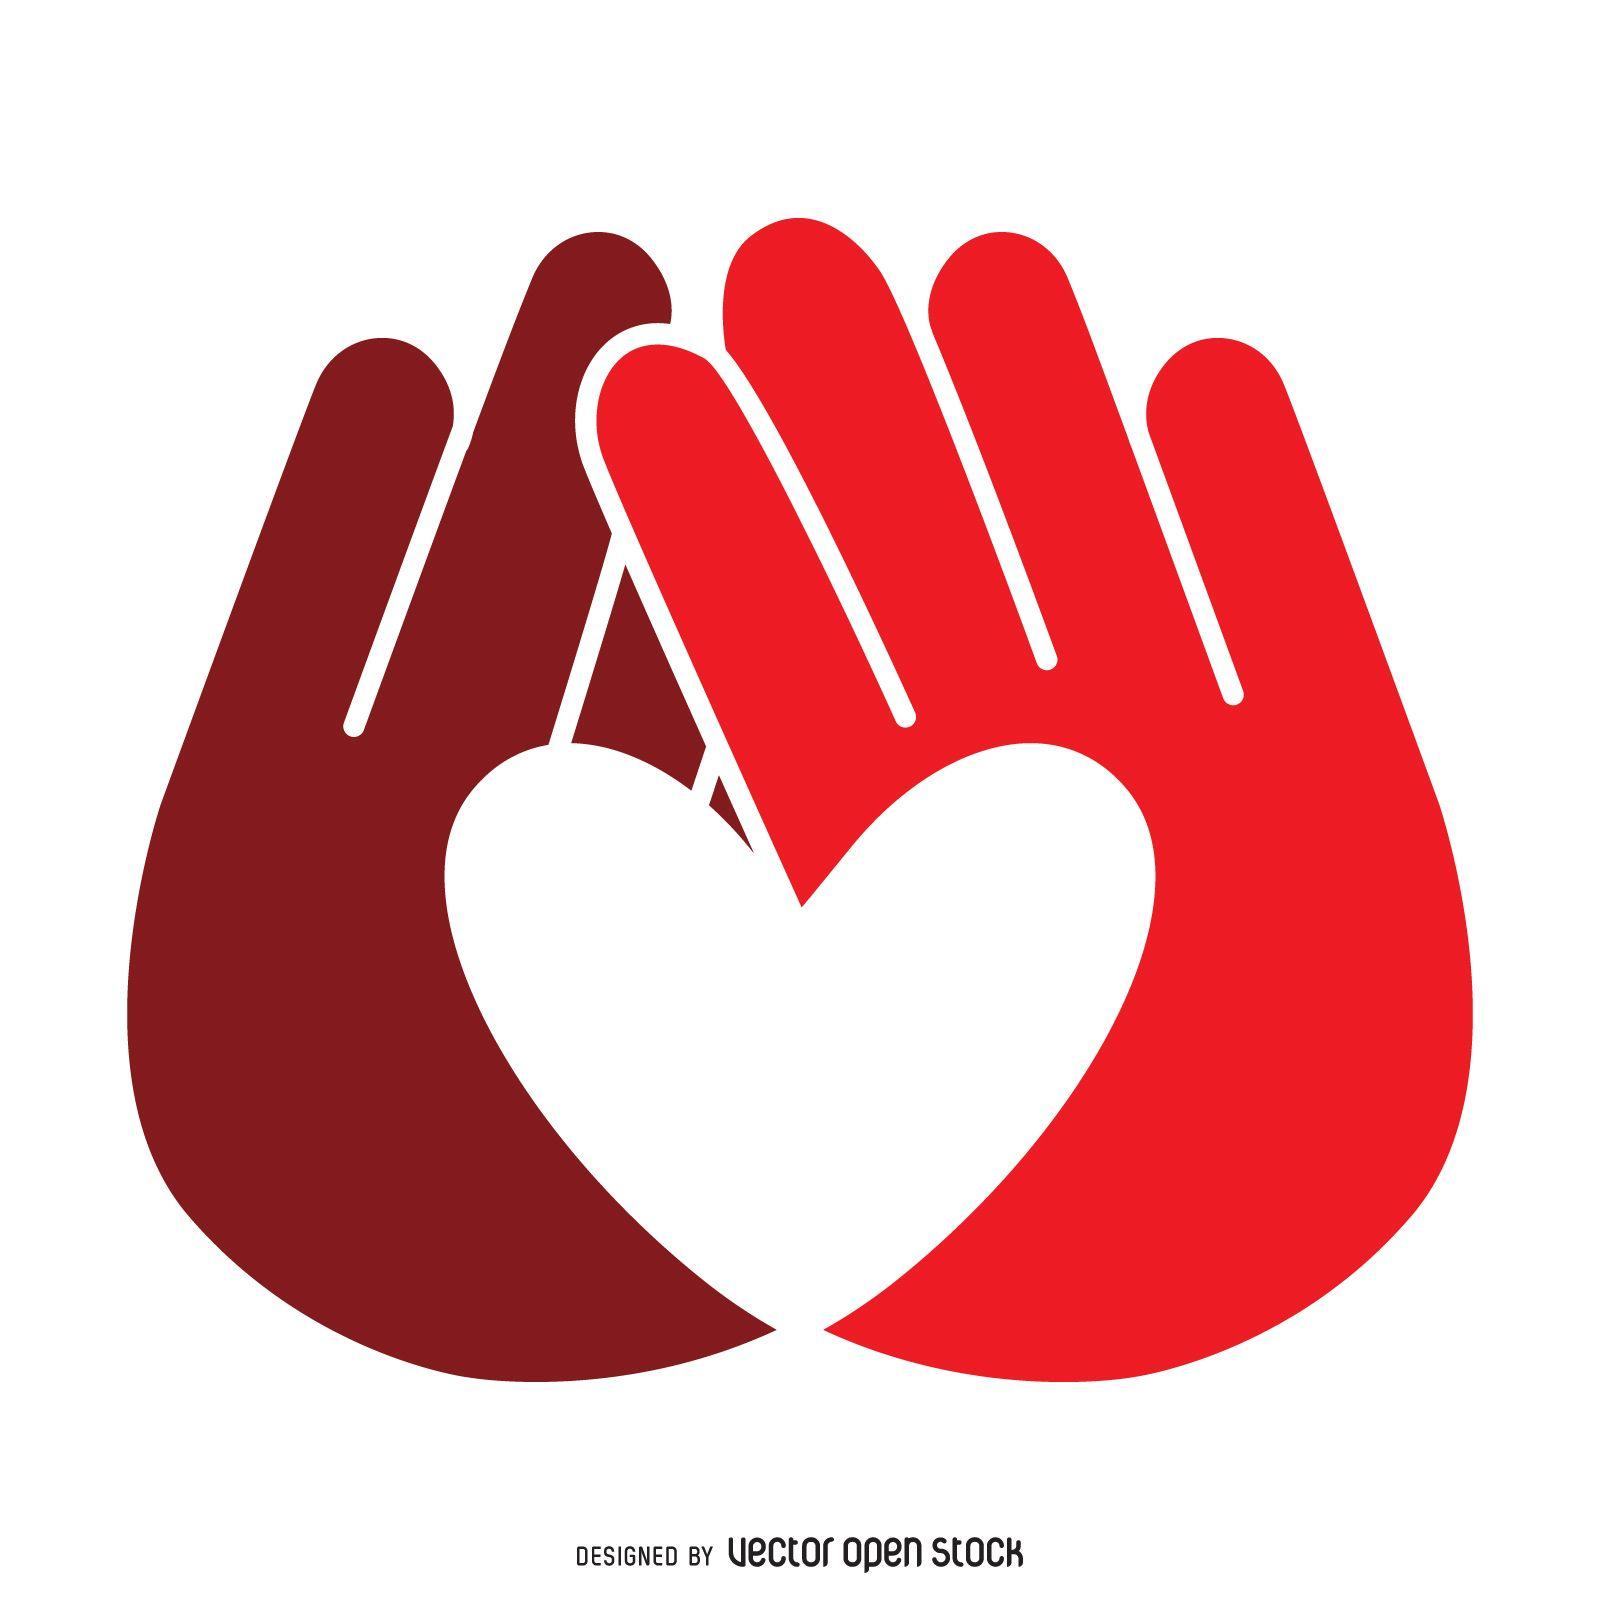 2 Hands Logo - Logo template design featuring two hands that together make a heart ...